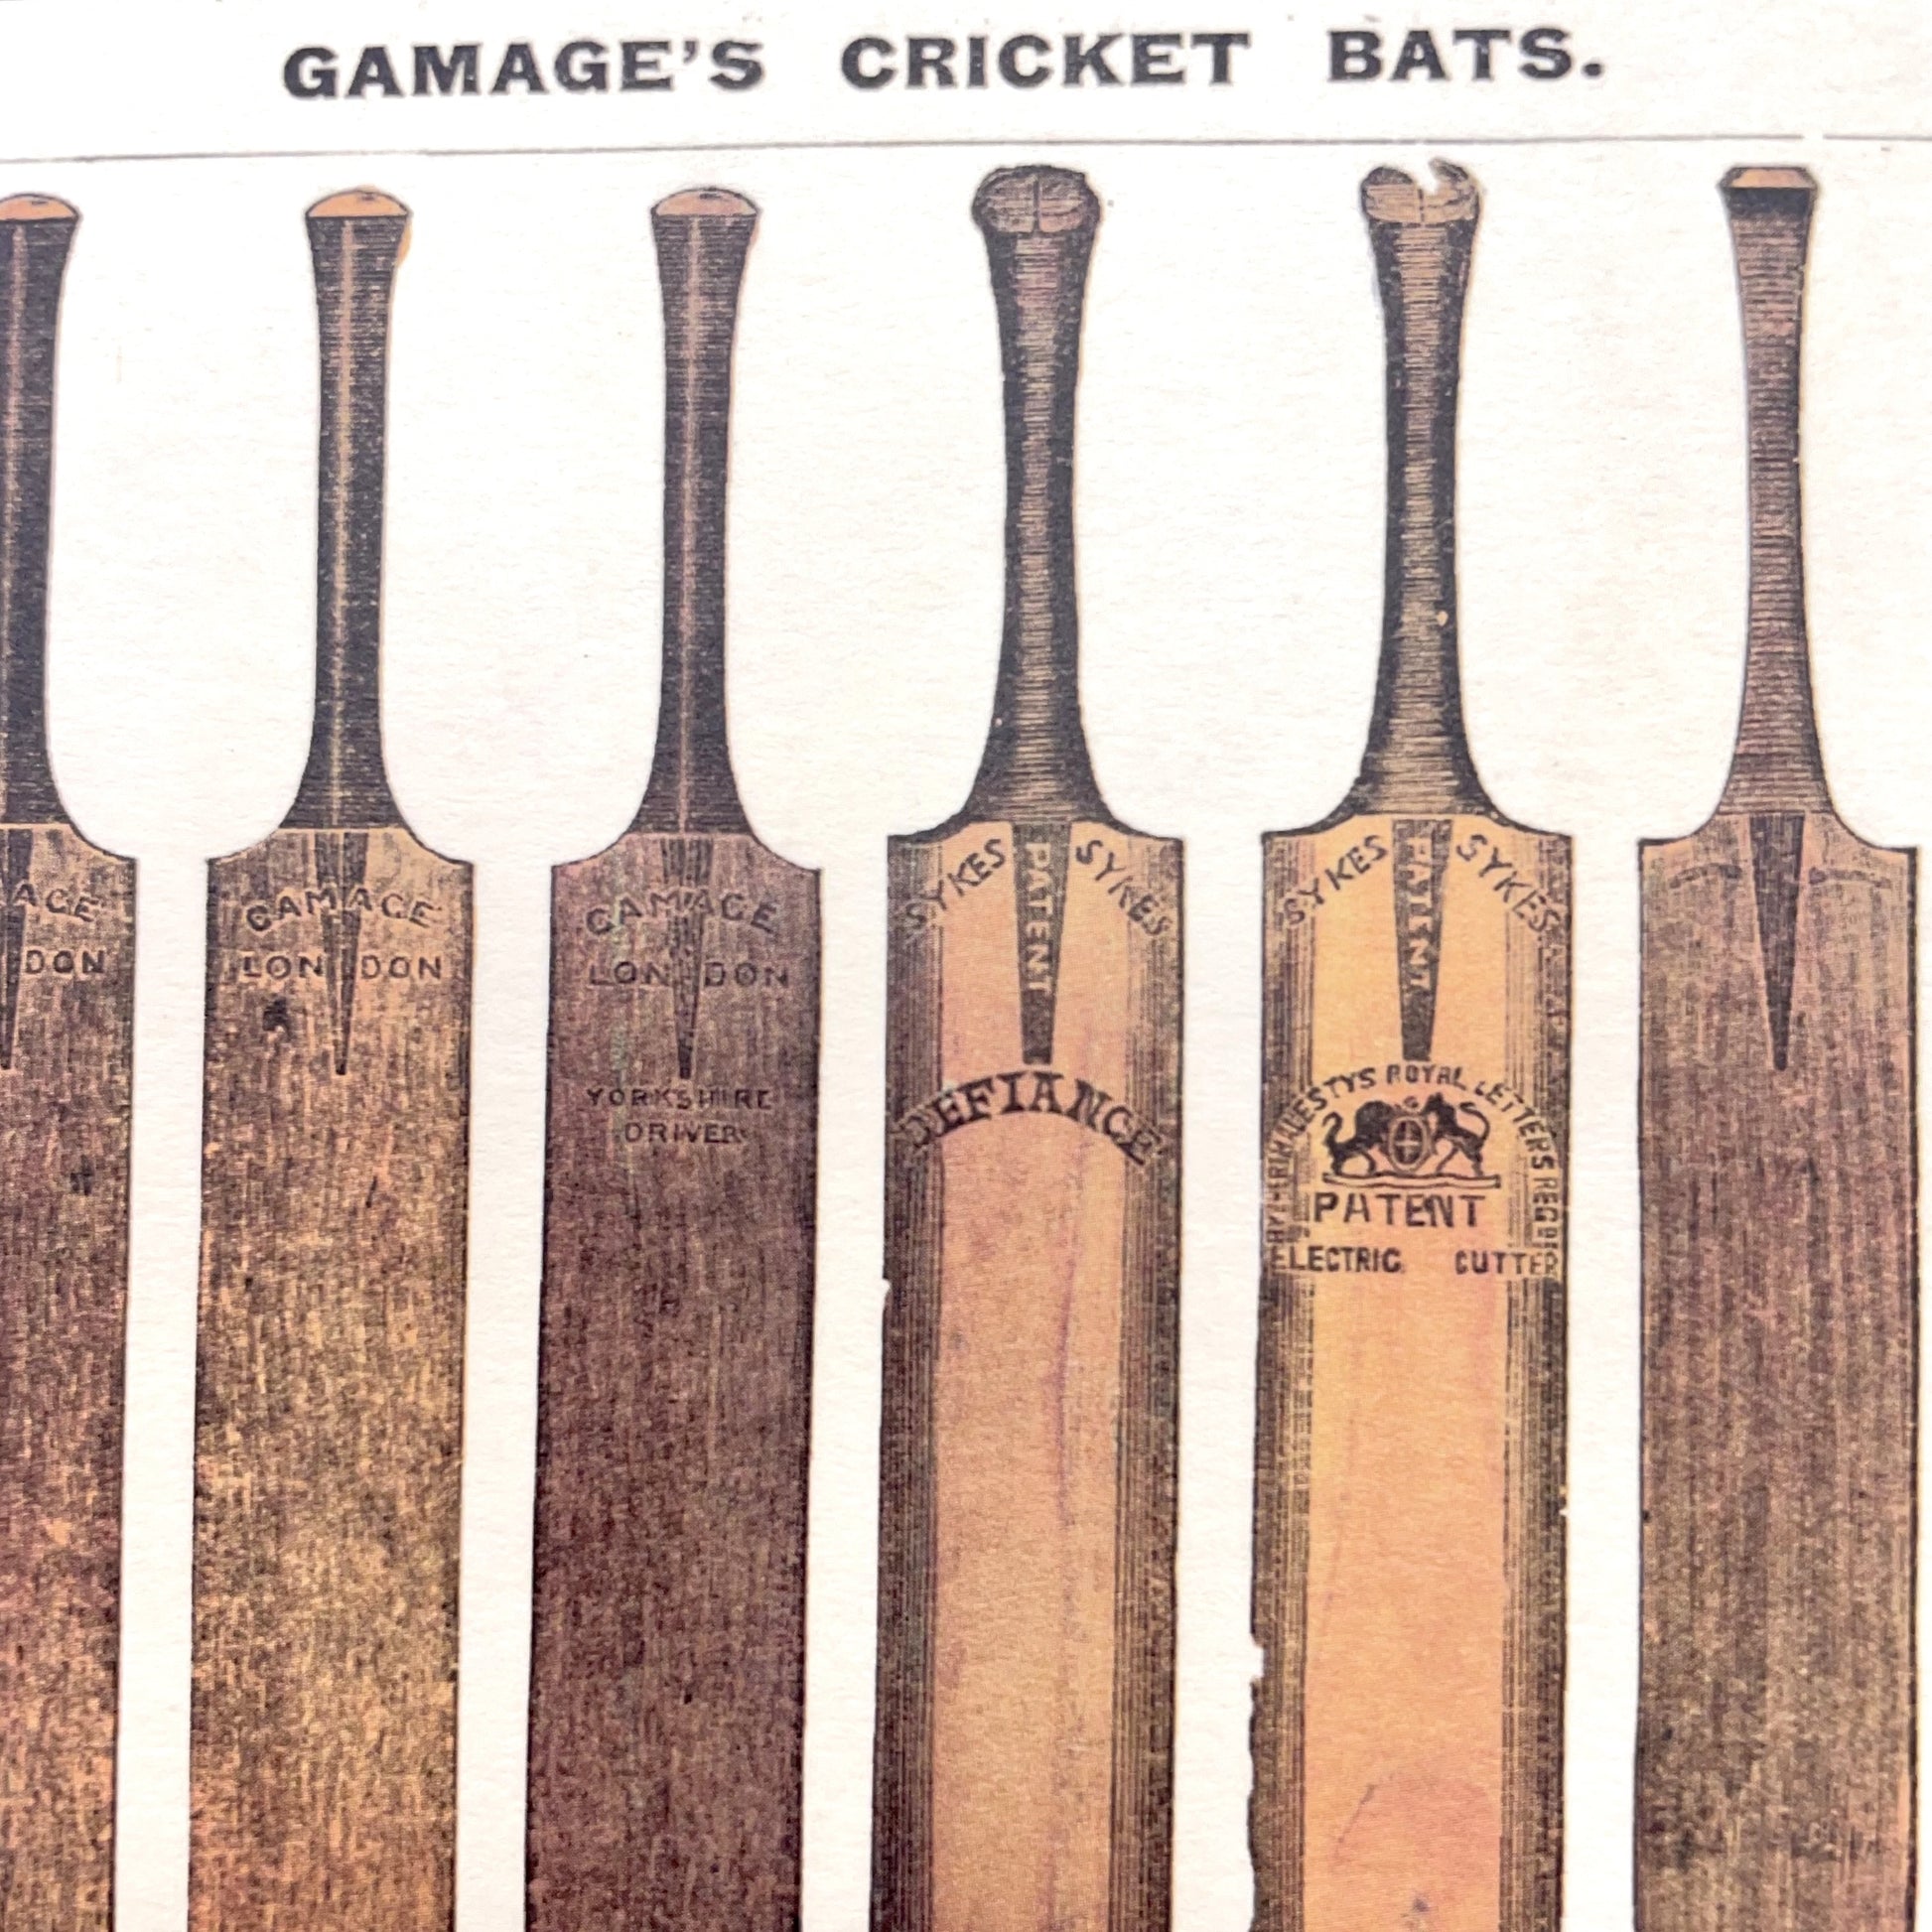 A greetings card with images of cricket bats adapted from a vintage catalogue. by The Pattern Book. Close-up